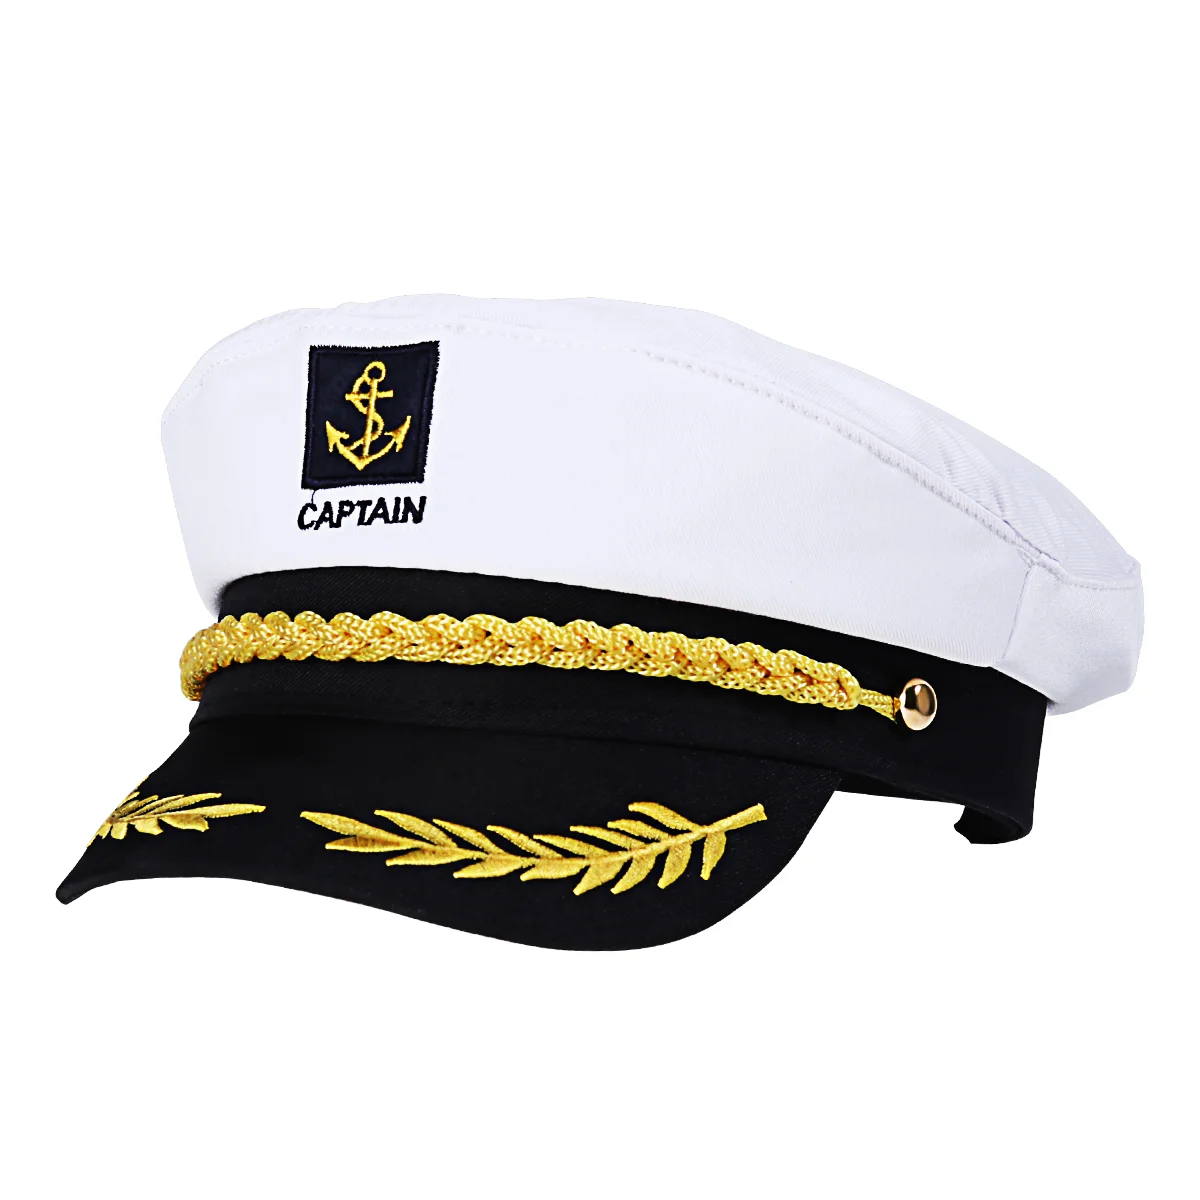 

Hat Captain Sailor Boat Captains Yacht Hats Costume Navy Men Cap Ship Marine Party Admiral White Nautical Women Boating Pirate